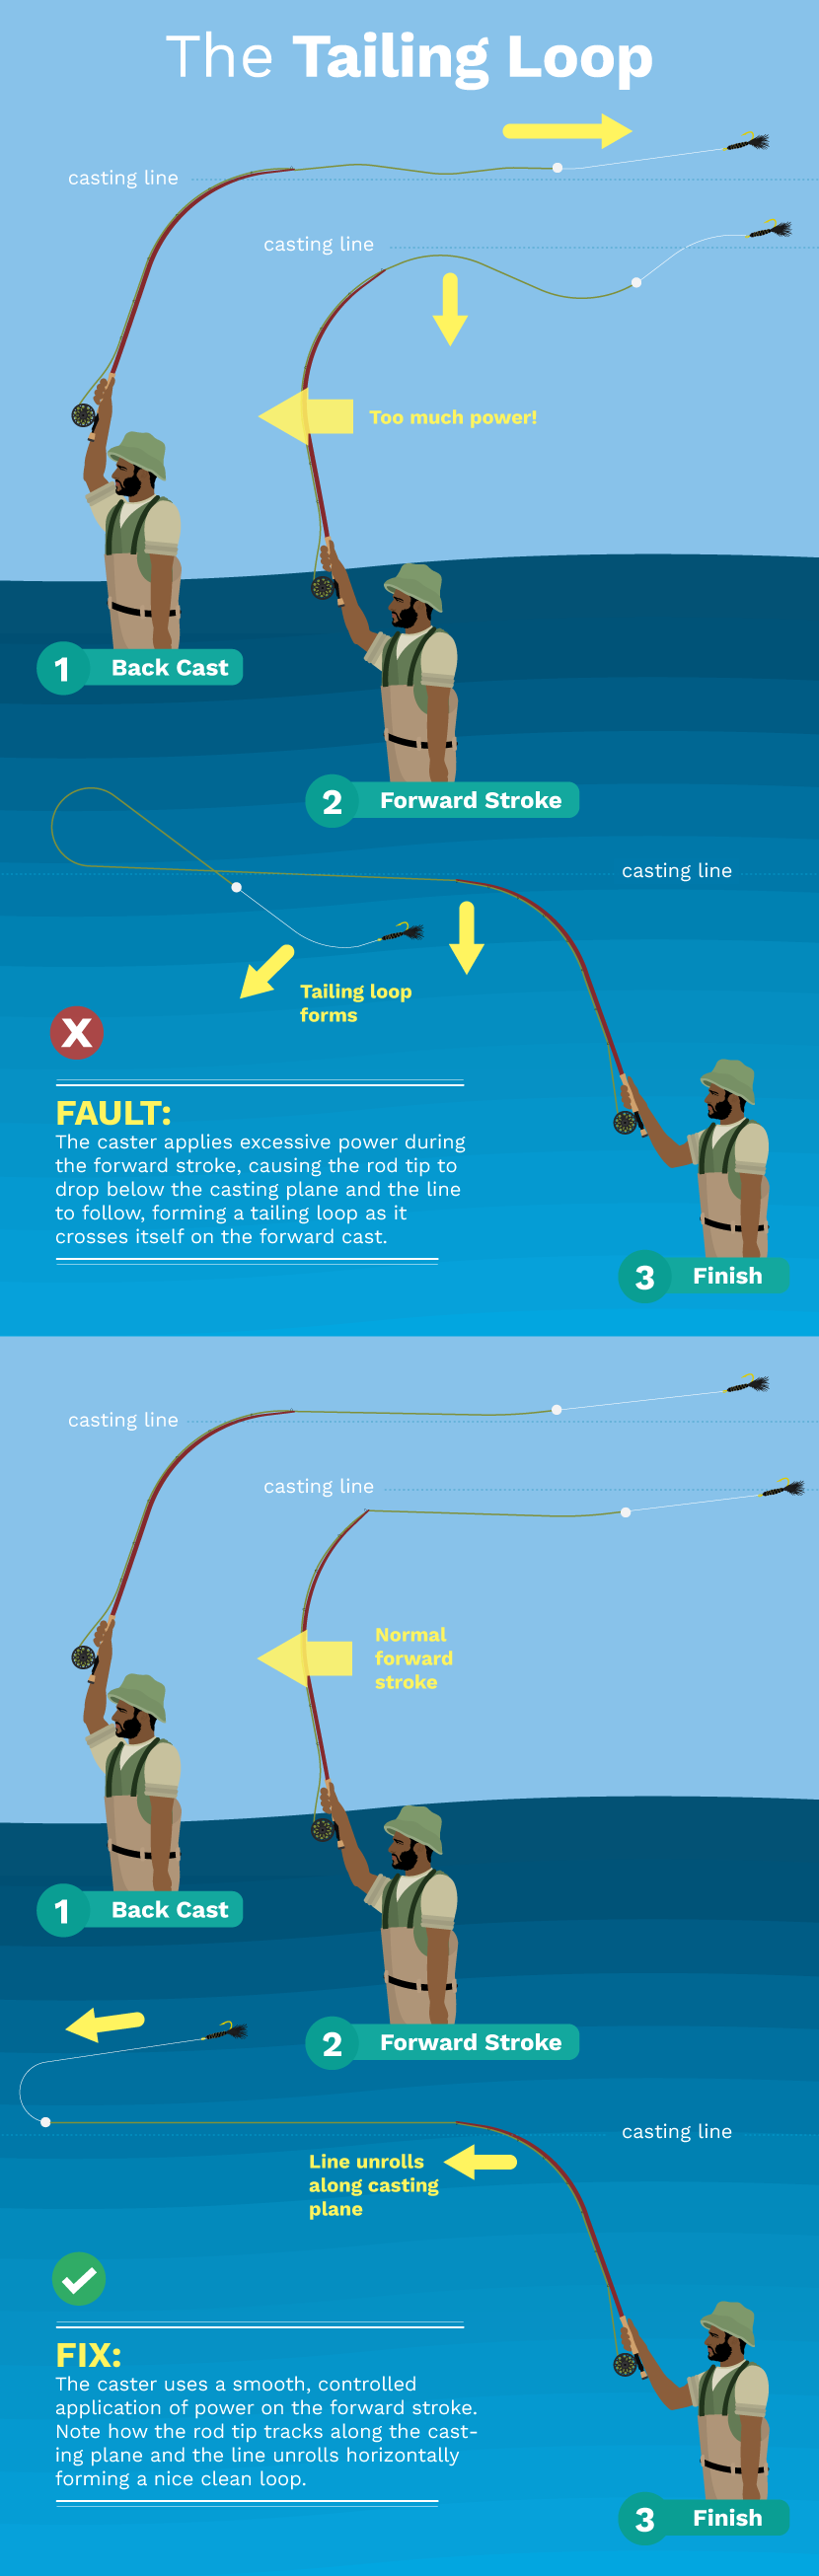 Learn to fish: casting line and catching fish